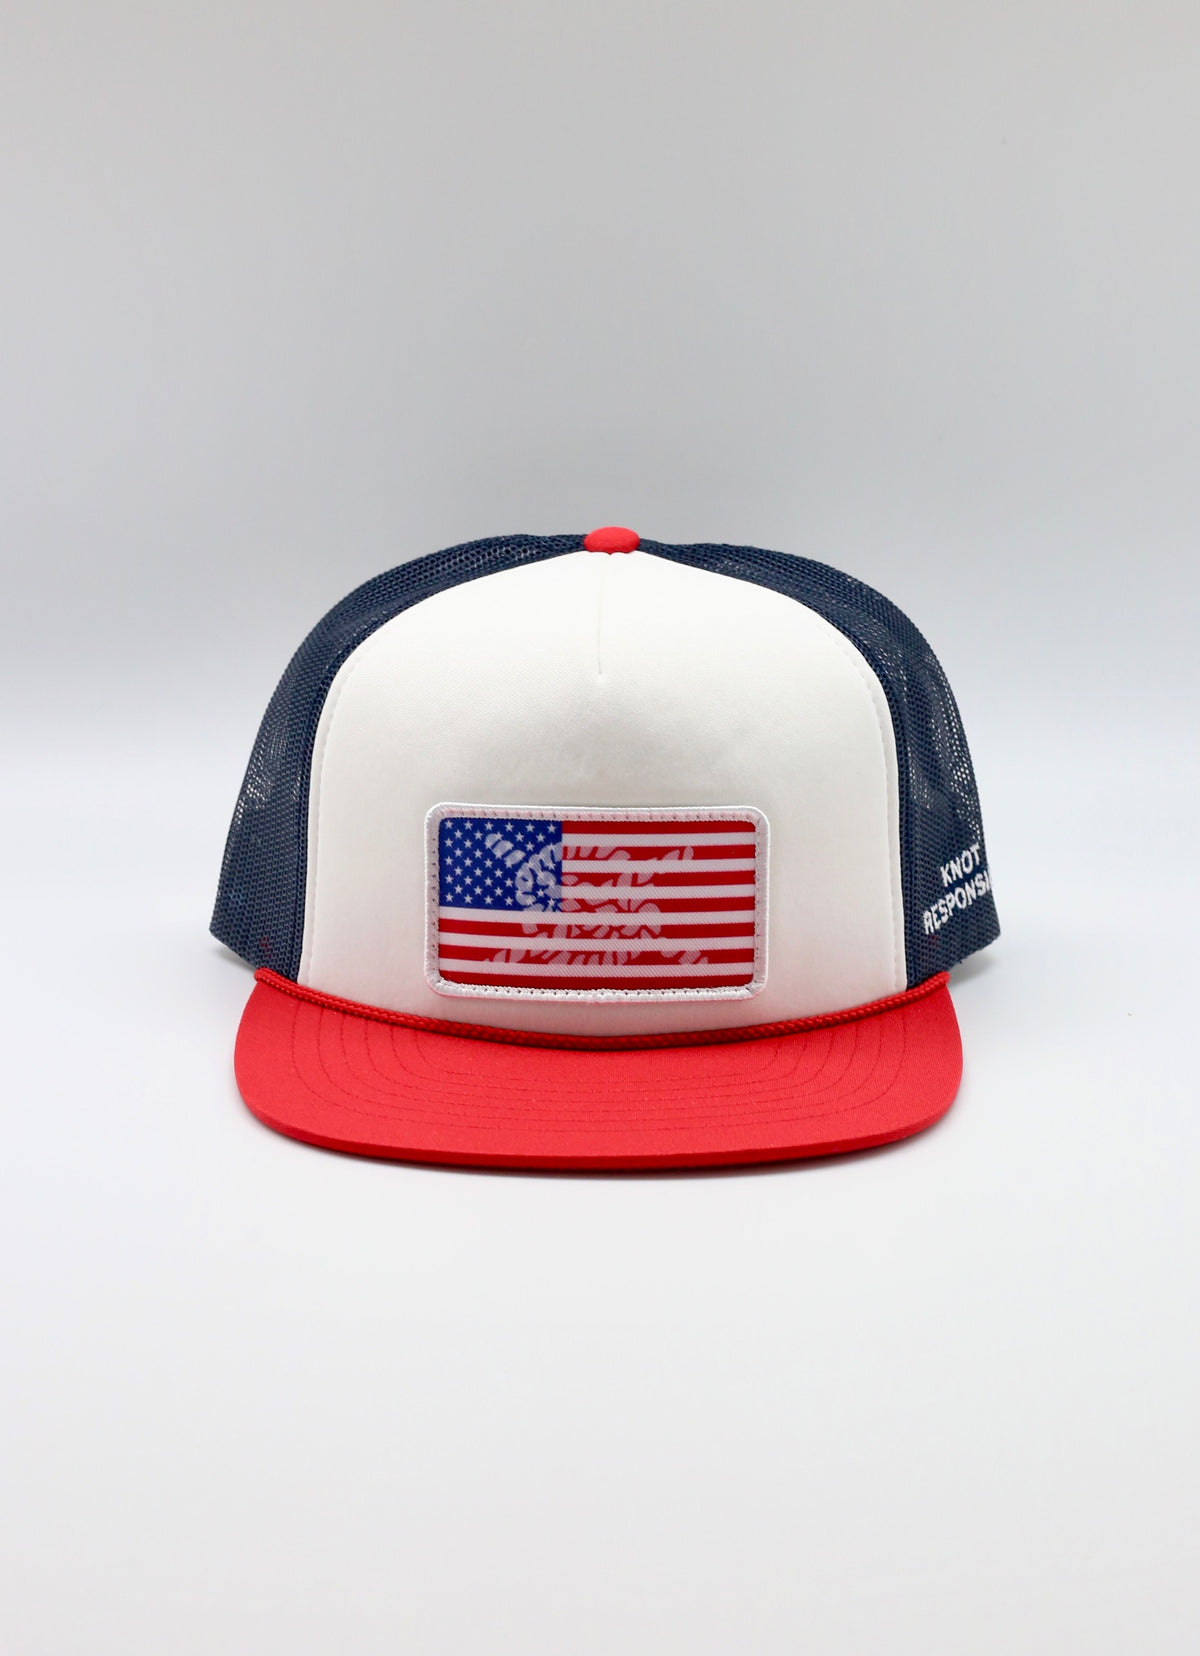 Limited Edition USA Patch Foam Trucker Hat- Red /Navy/White